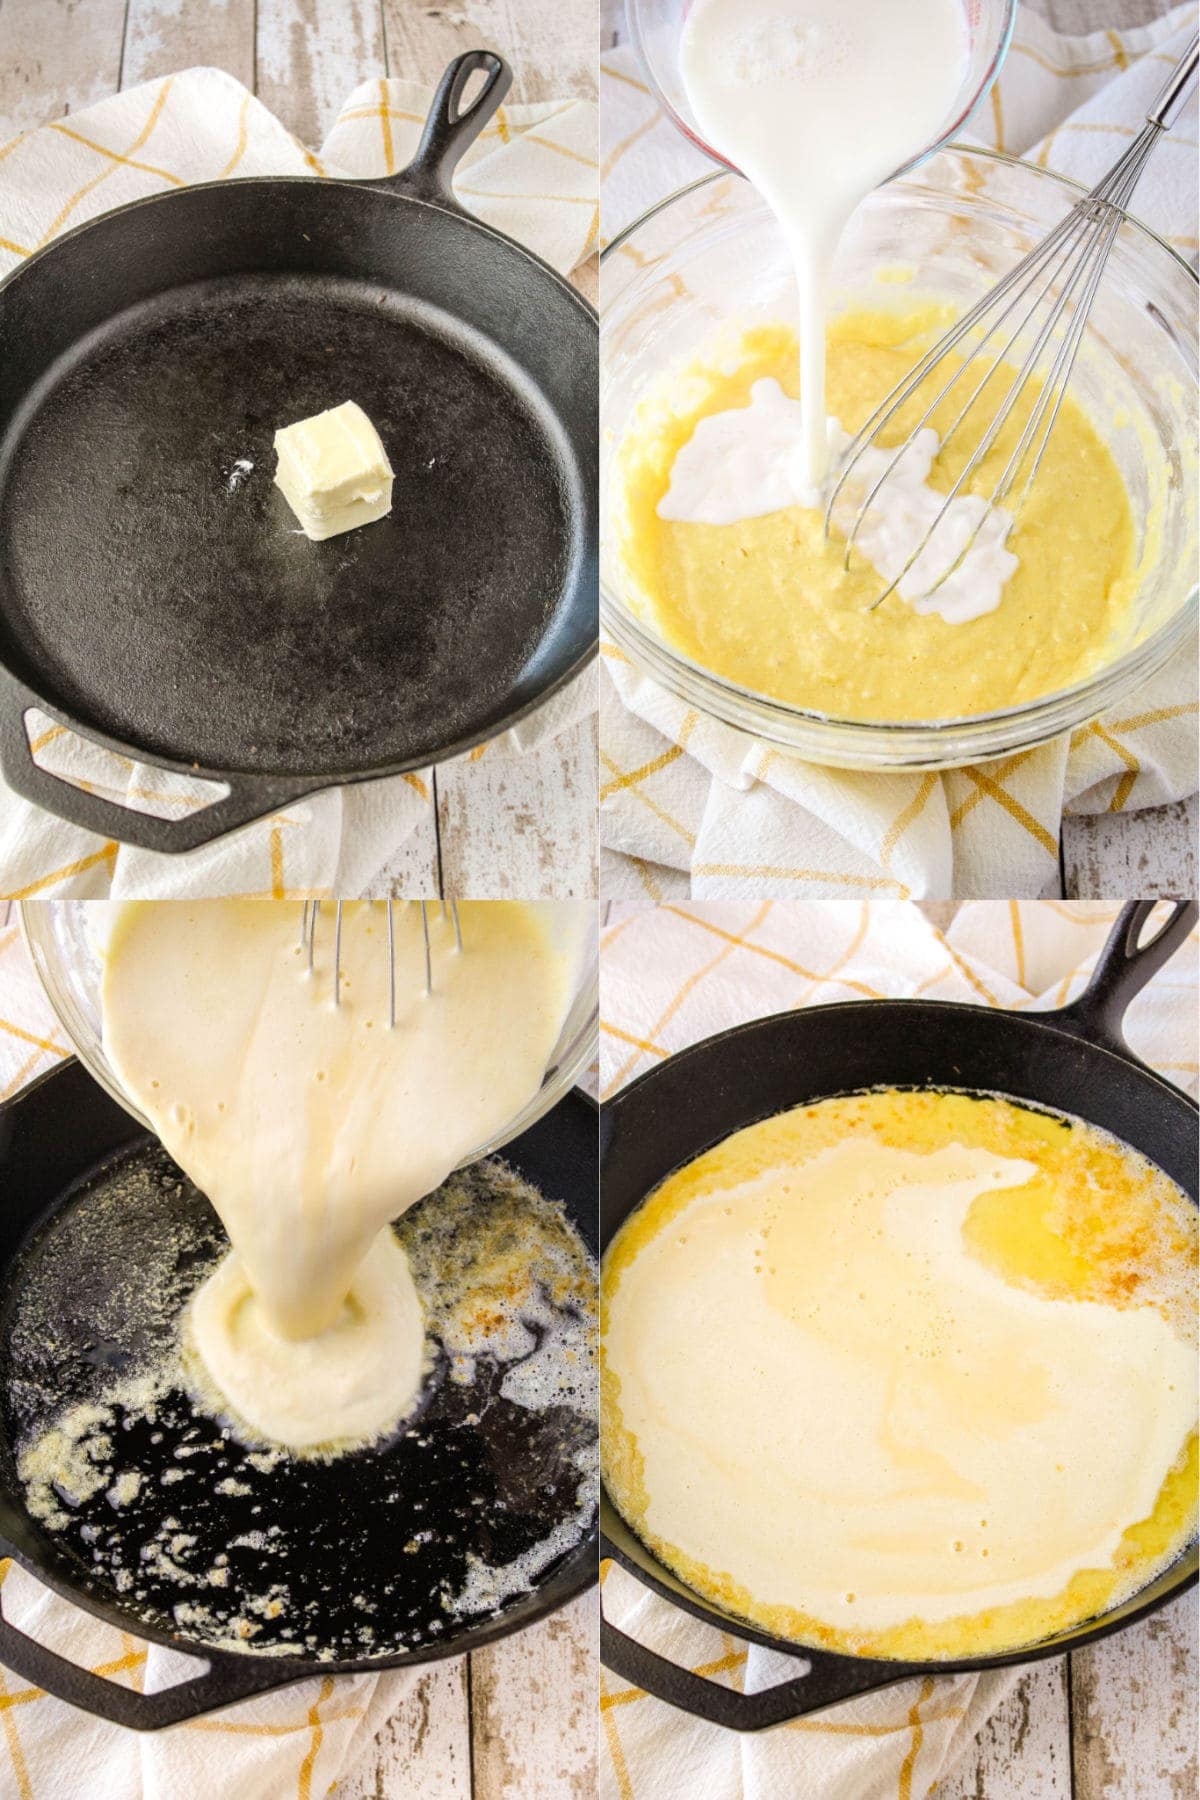 piece of butter in a cast iron skillet, milk being poured into pancake batter in a bowl with a whisk, pancake batter being poured into a skillet with melted butter, batter and melted butter in hot skillet